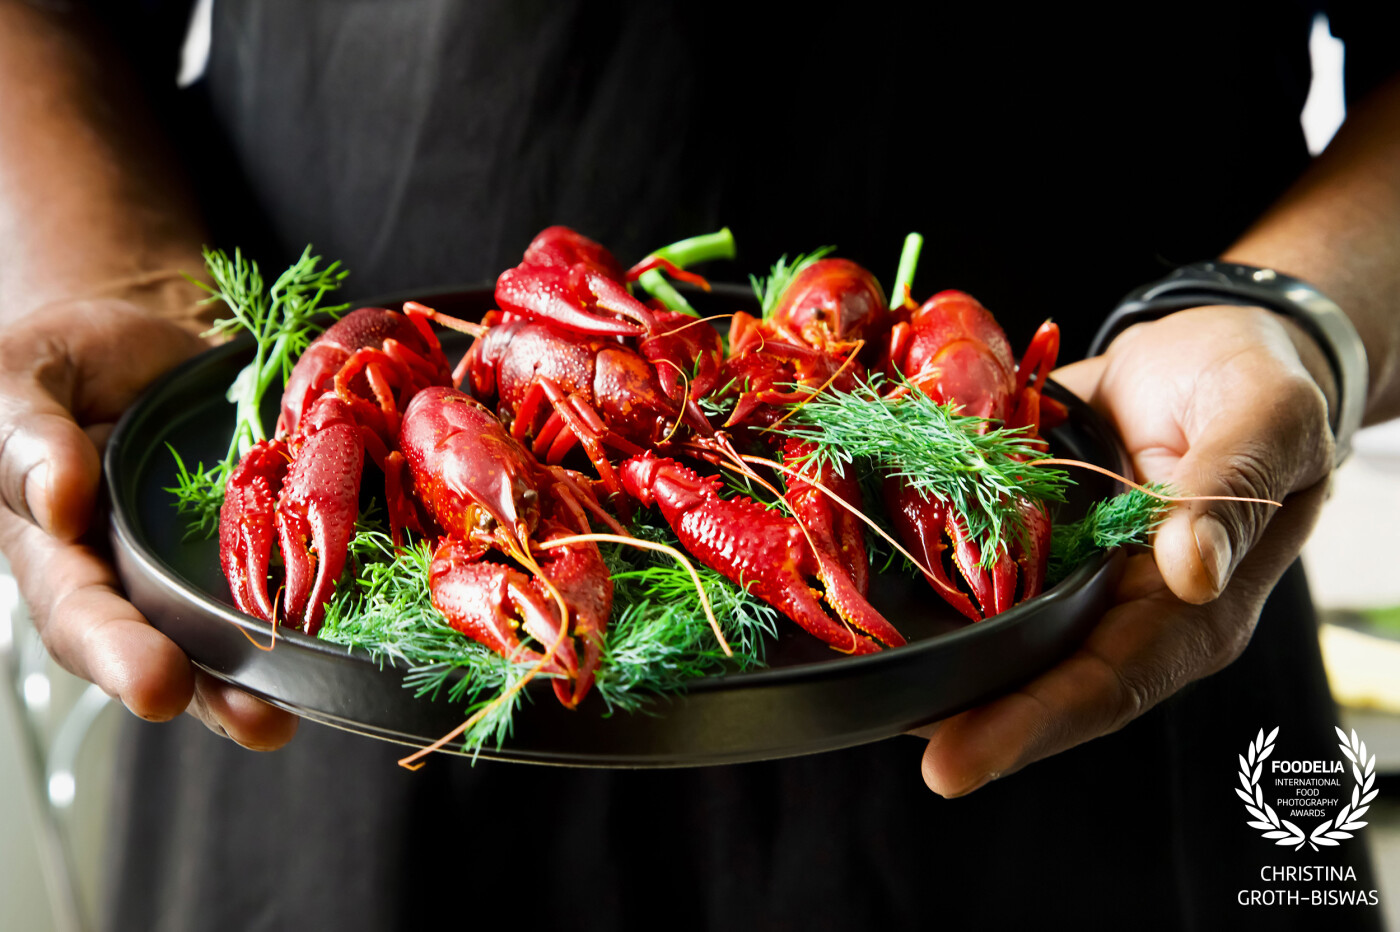 In my house, we traditionally eat crayfish at the time of summer solstice. I love the intense colour of the crayfish, together with  the dill, which I wanted to bring out without overpowering the image with too much colour or other noise. <br />
I used natural light for this image.